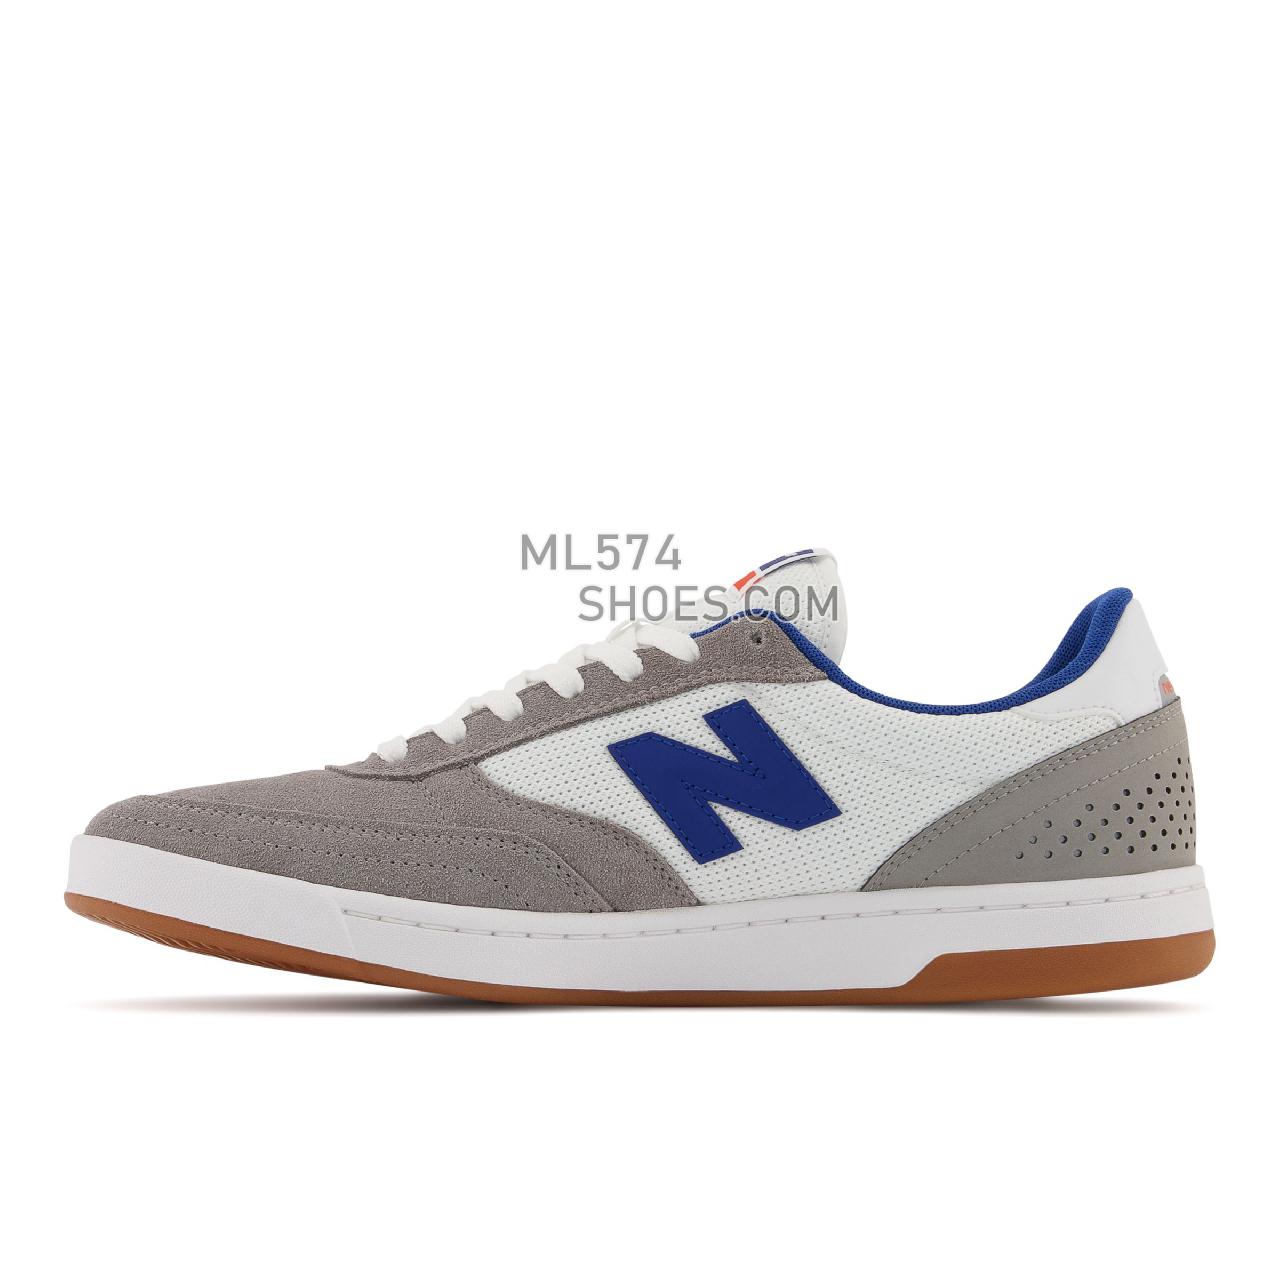 New Balance NB NUMERIC 440 - Men's Court Classics - Grey with White - NM440GWR